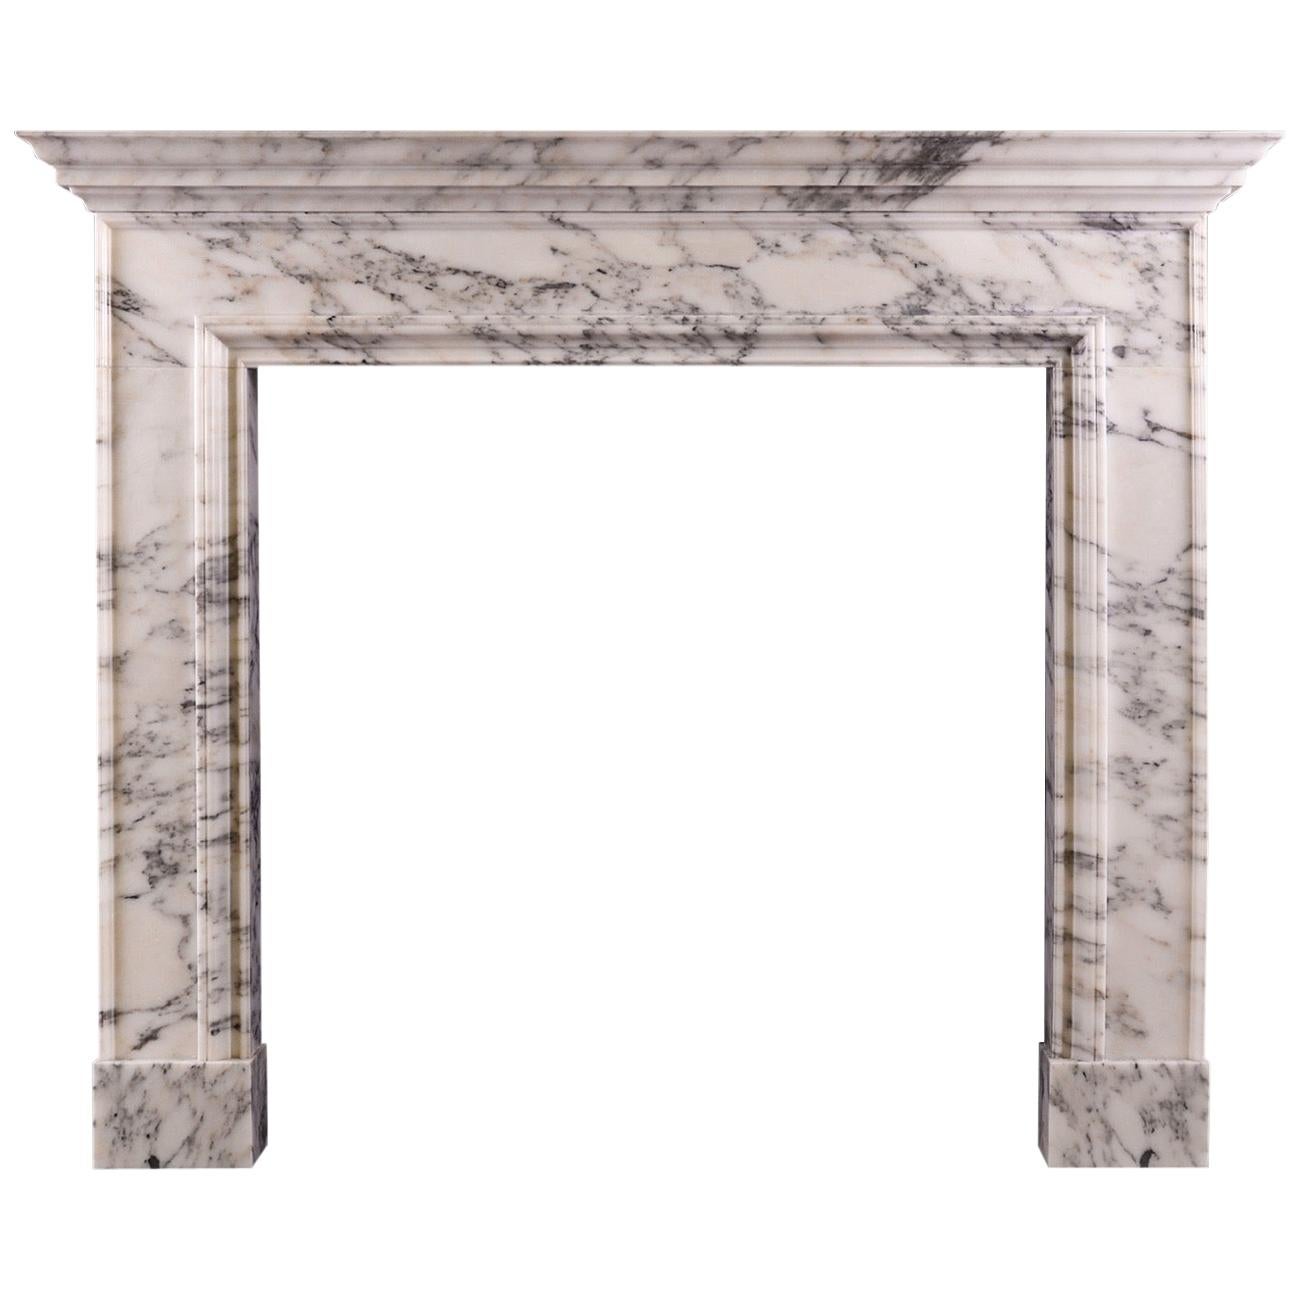 Simple Italian Arabescato Marble Fireplace of Architectural Form For Sale